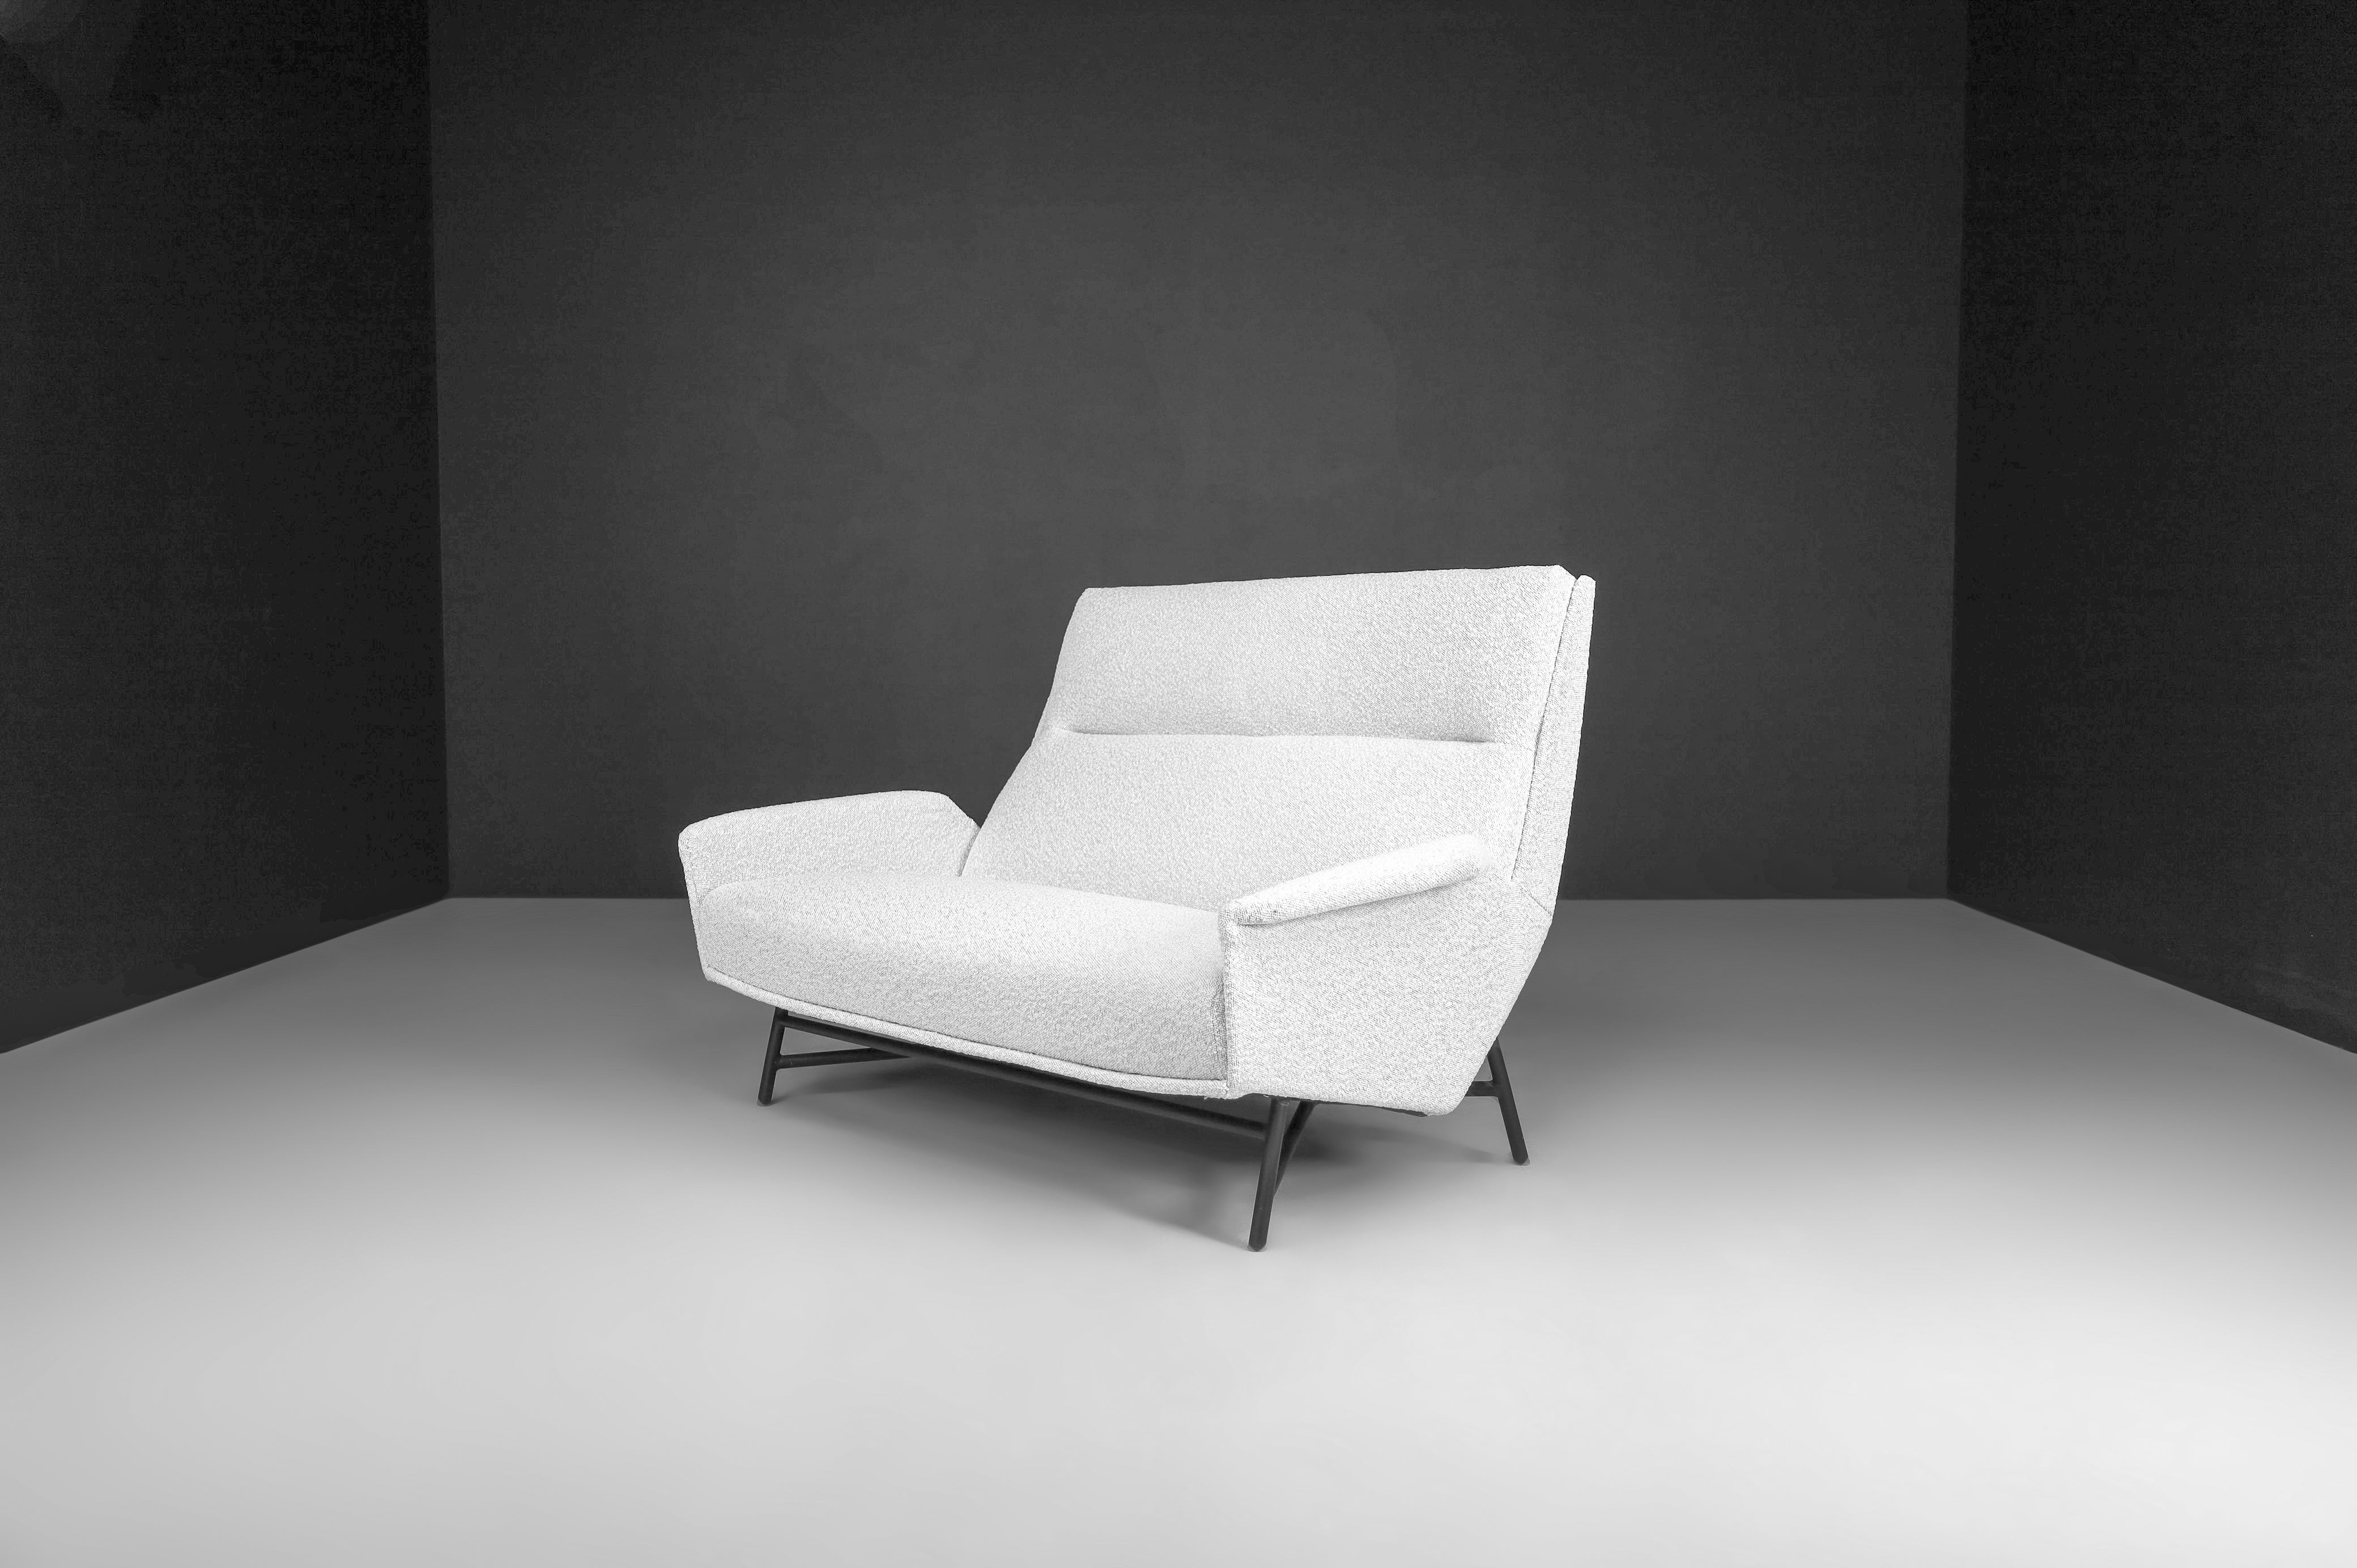 Mid-Century Modern Lounge Sofa in Re-Upholstered Bouclé by Guy Besnard, France 1959

Mid-Century Modern lounge sofa designed and edited by Guy Besnard in re-upholstered Bouclé fabric, France, 1959. This sofa/love seat would be an eye-catching